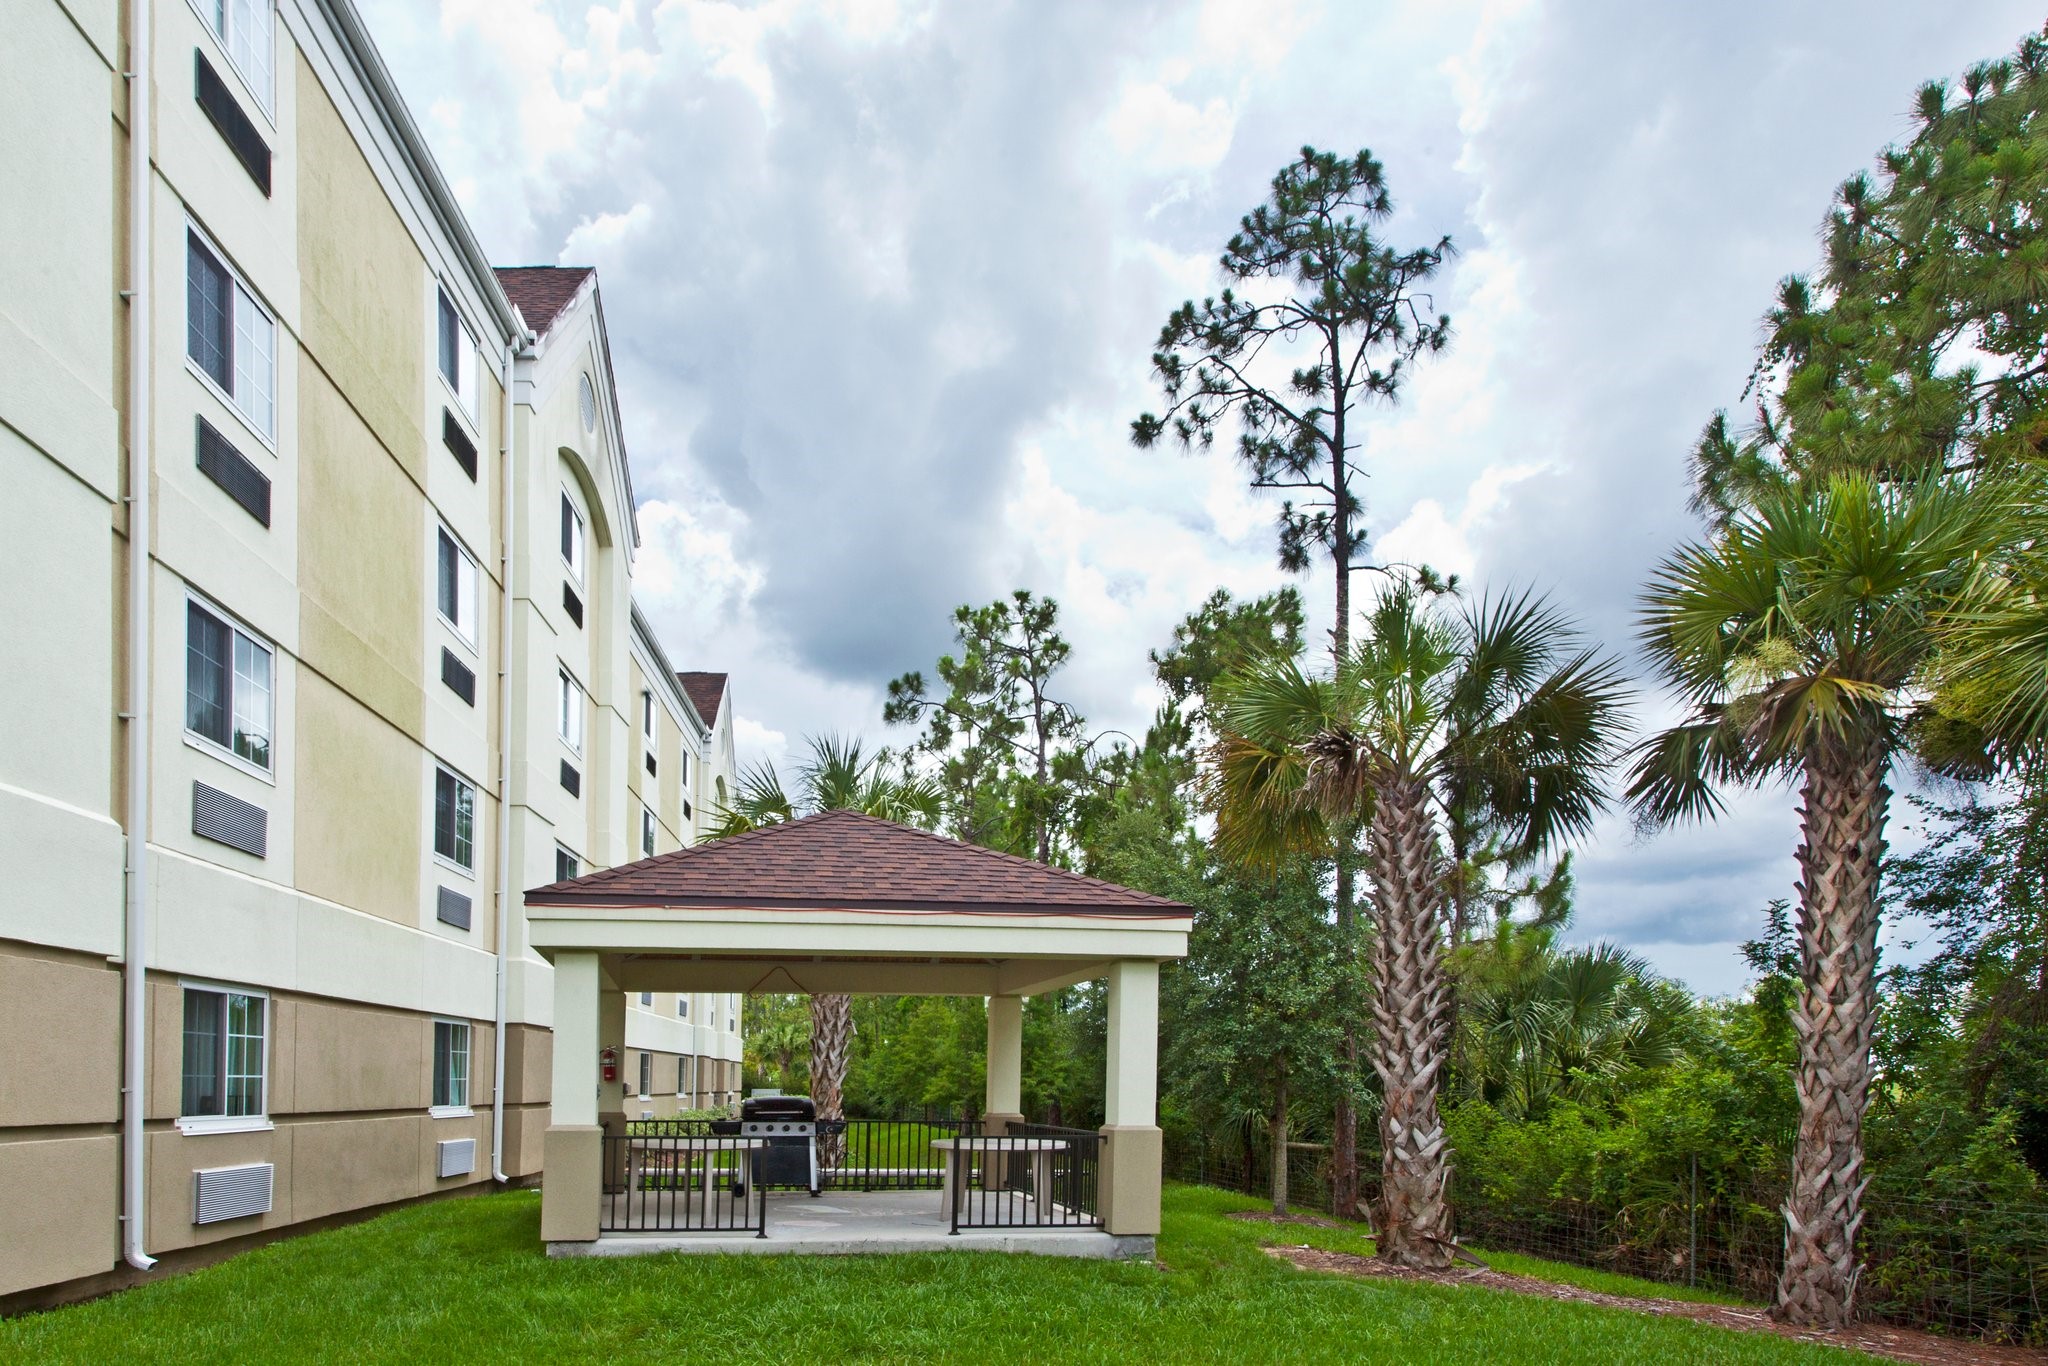 Meeting Rooms at Candlewood Suites FT MYERS I 75 3626 COLONIAL COURT